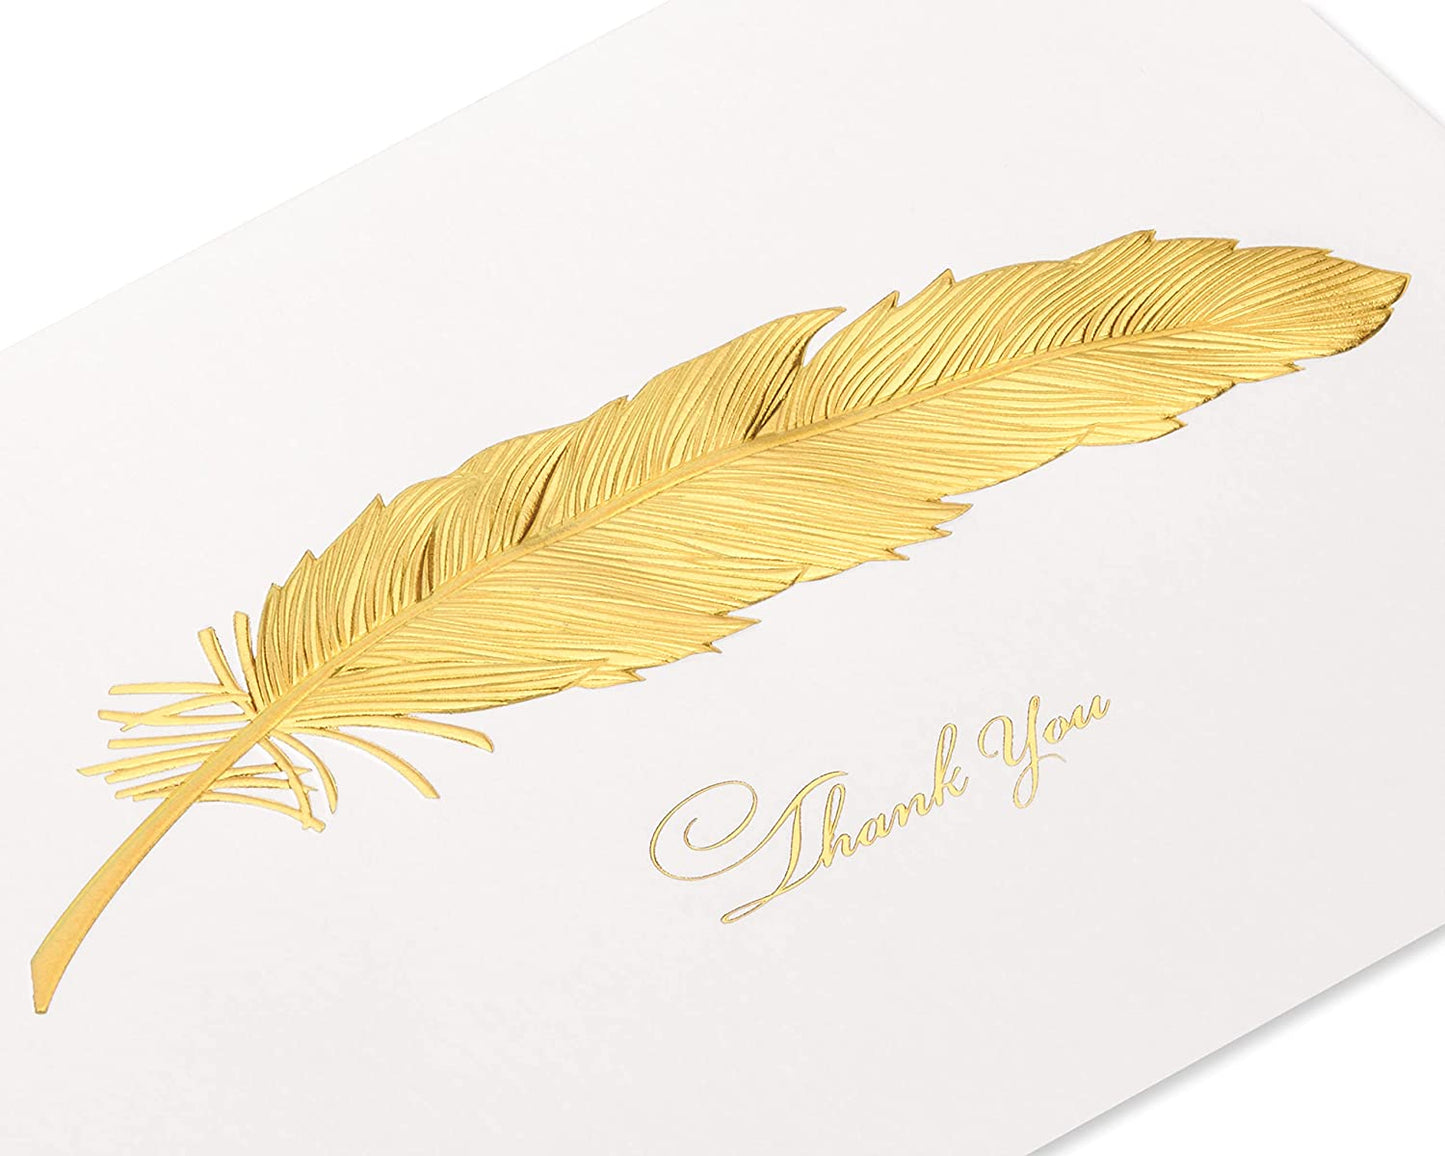 Papyrus Blank Thank You Card (Thank You Feather)